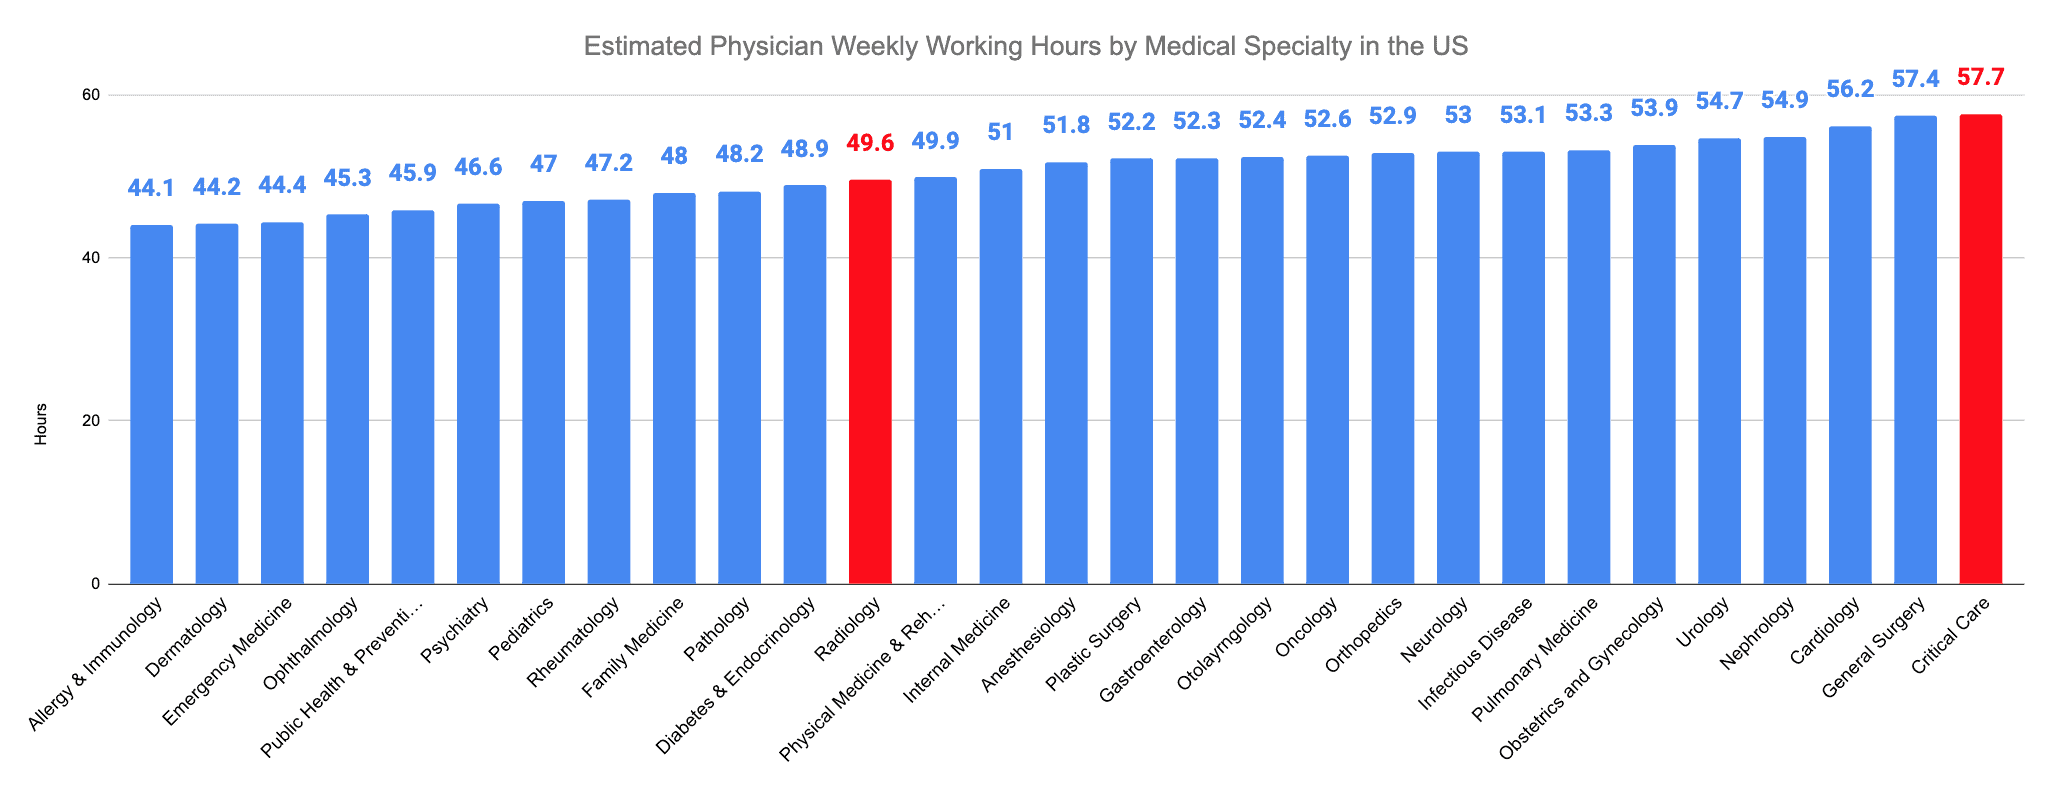 Radiology vs. Critical Care Estimated Physician Weekly Working Hours by Medical Specialty in the US